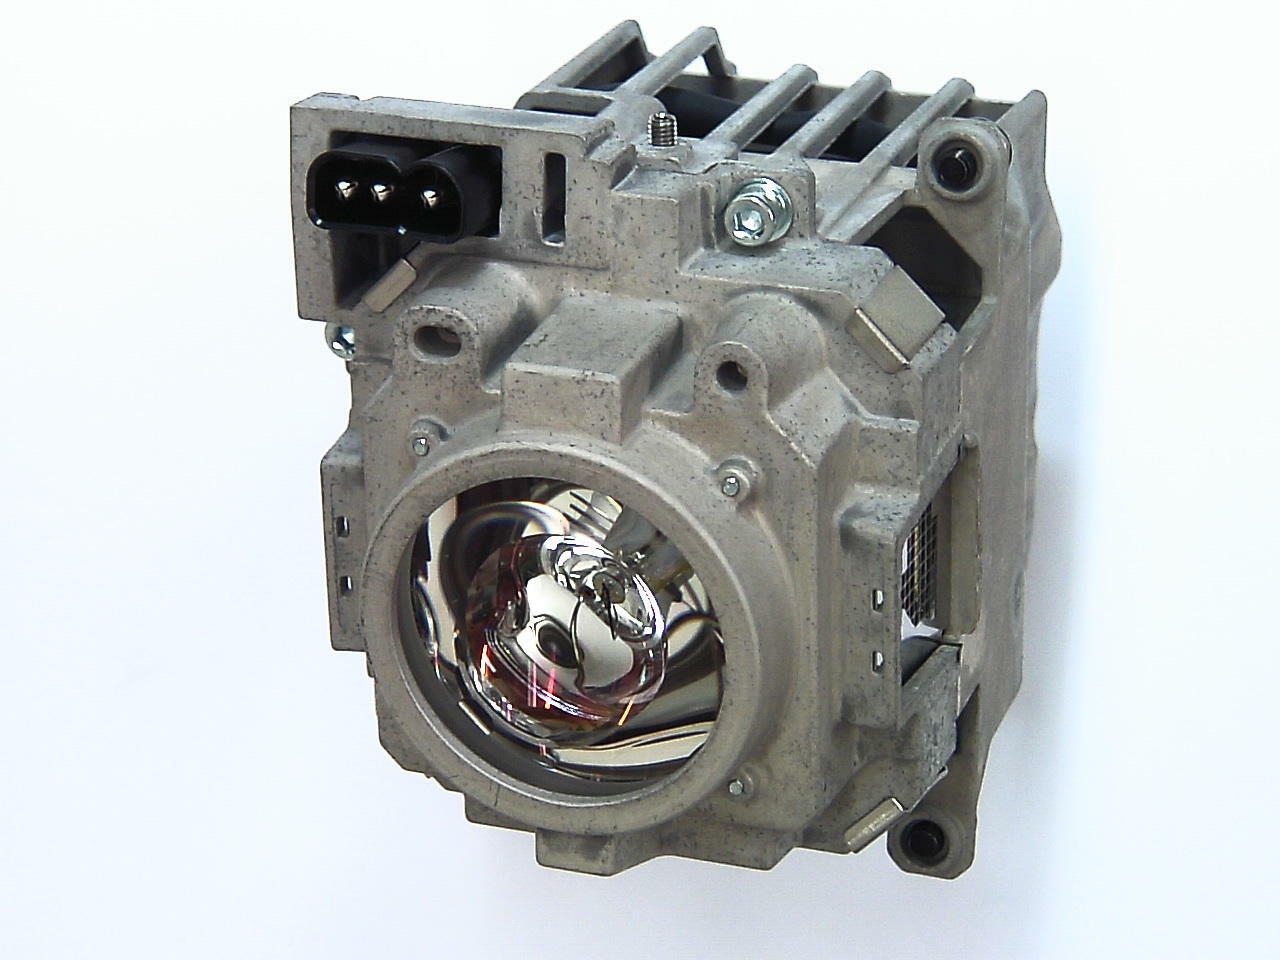 Original Ushio Projector Lamp Replacement with Housing for Christie 003-102385-01